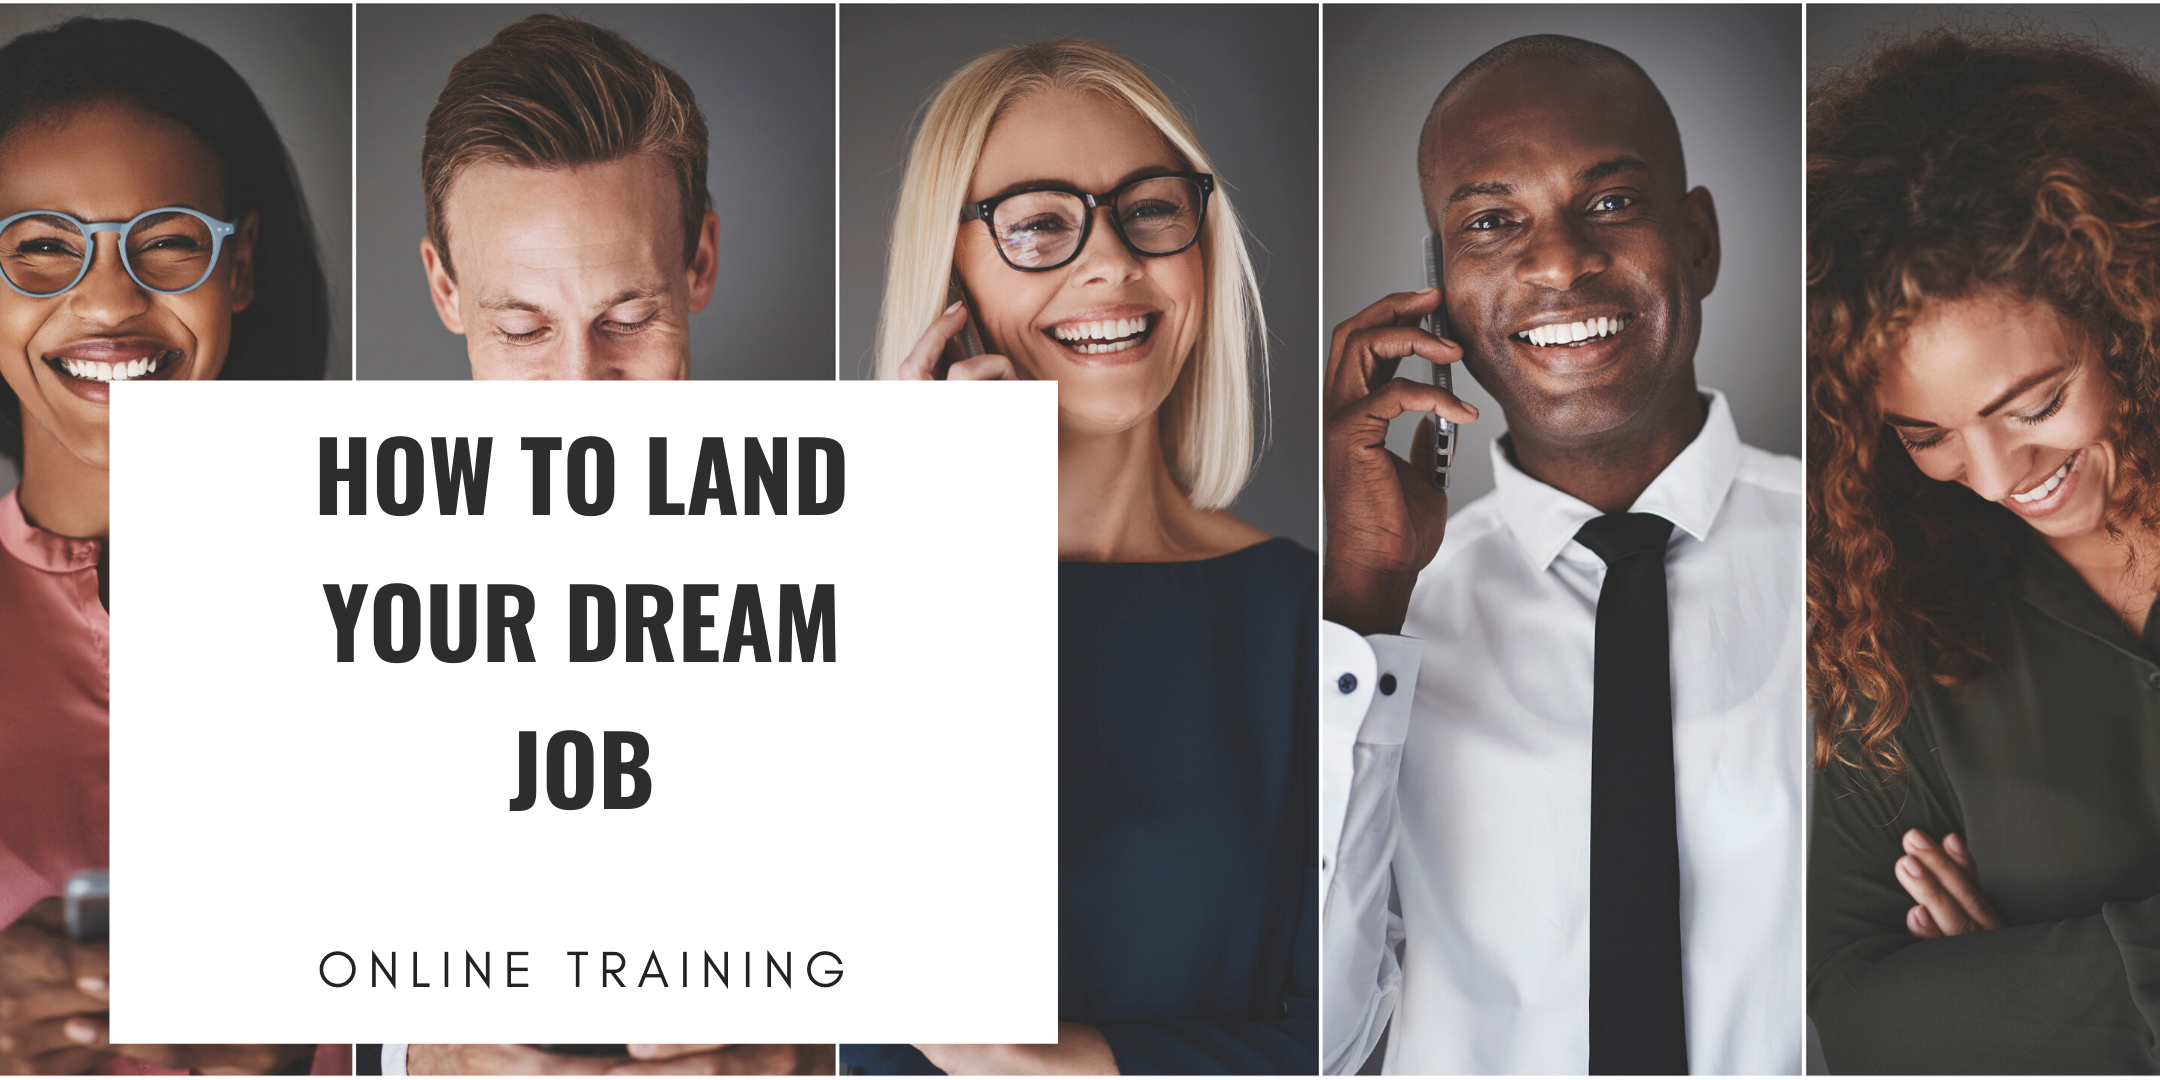 FREE TRAINING: HOW TO LAND YOUR DREAM JOB (CAREER WORKSHOP) Akron, OH